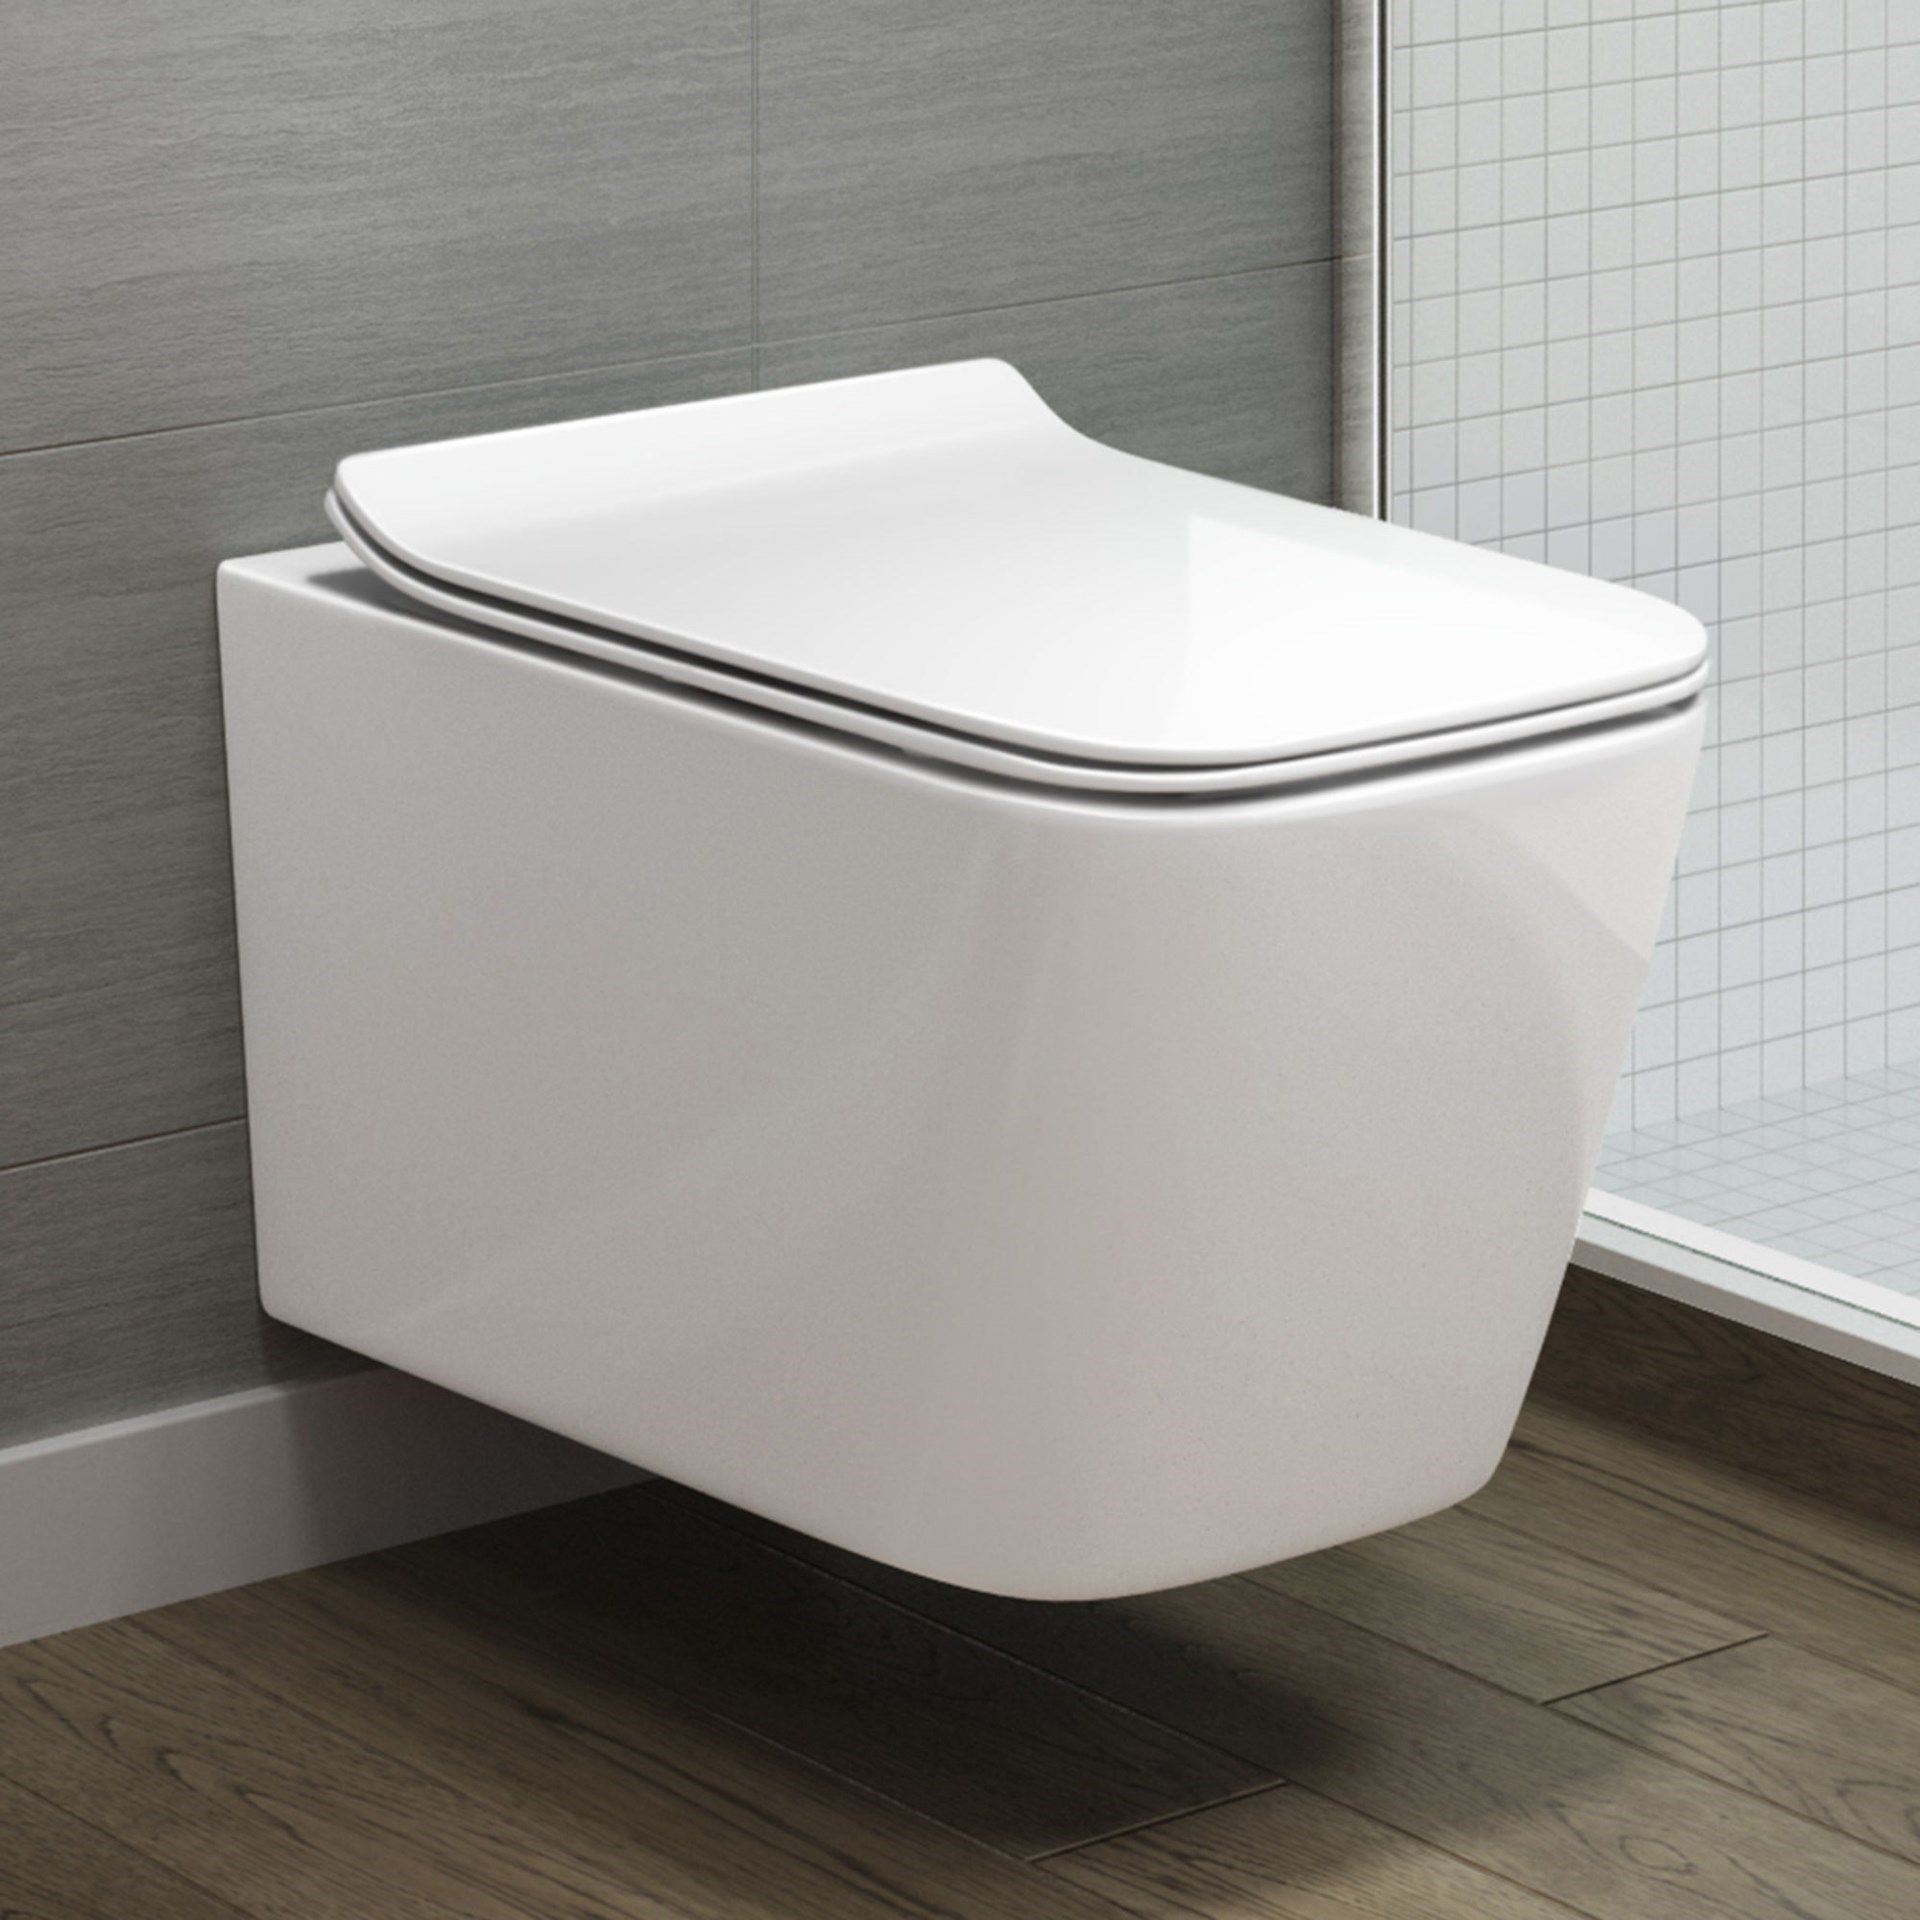 6 BRAND NEW BOXED Florence Wall Hung Toilet inc Luxury Soft Close Seat.RRP £349.99.Made from White